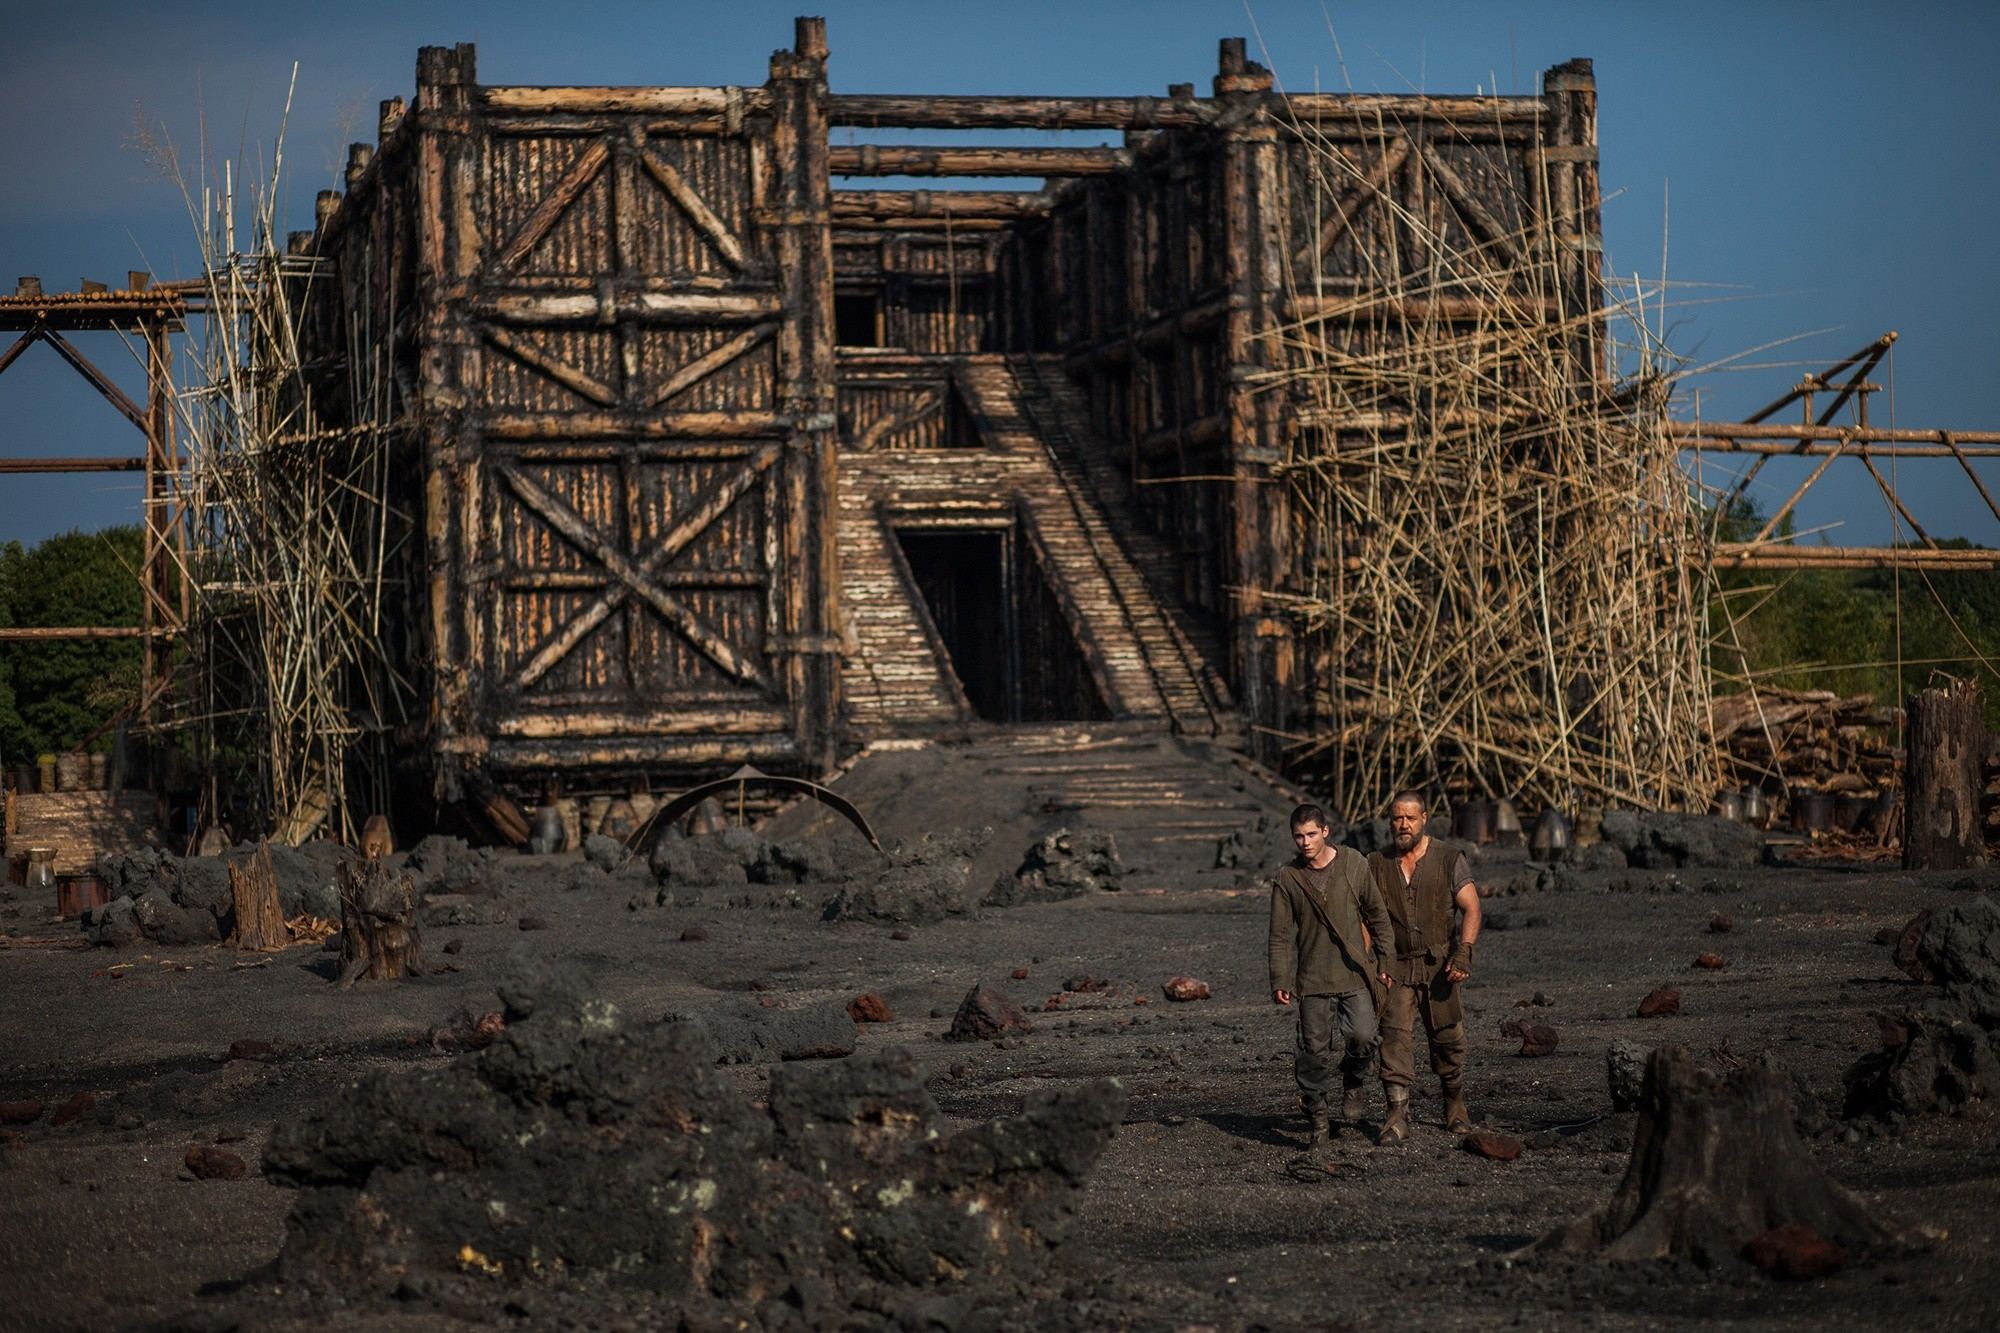 Logan Lerman stars as Ham and Russell Crowe stars as Noah in Paramount Pictures' Noah (2014)